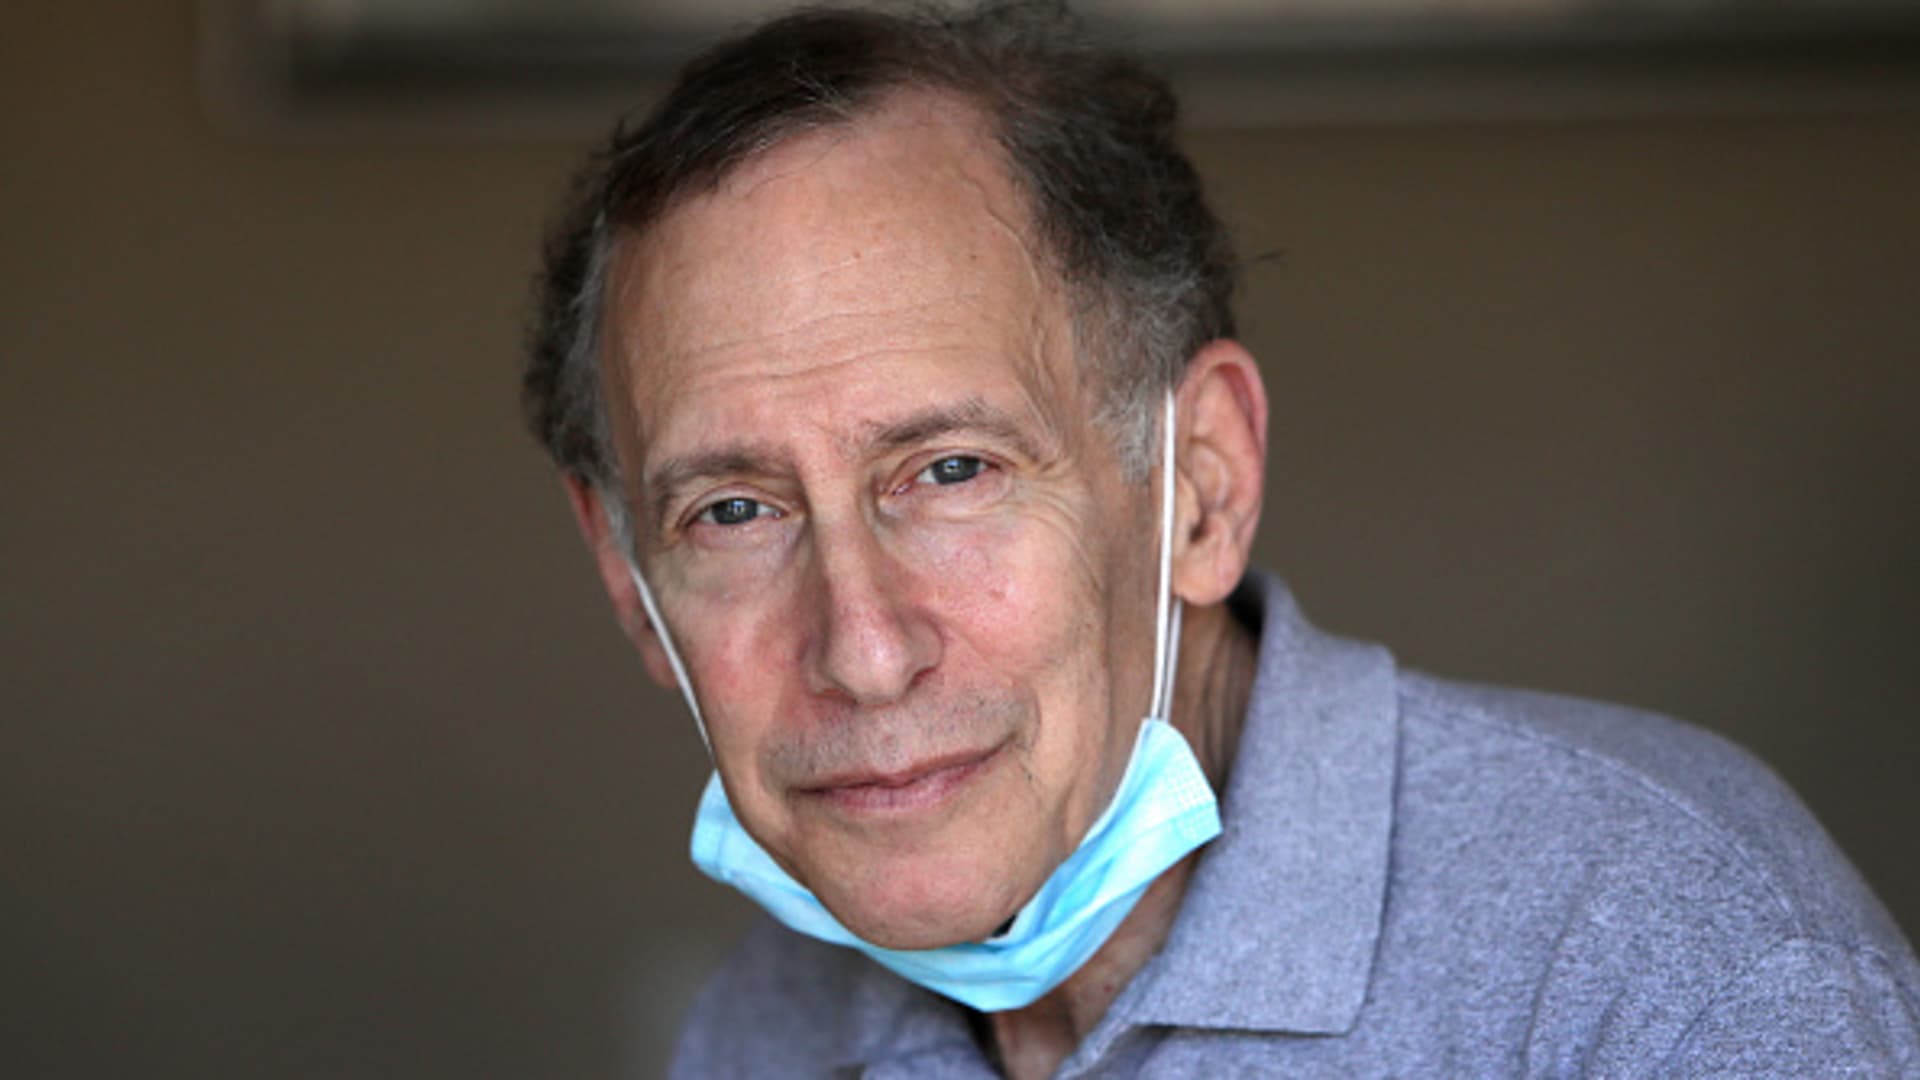 Portrait of Robert Langer in his Cape Cod residence in North Falmouth, MA on April 25, 2020.